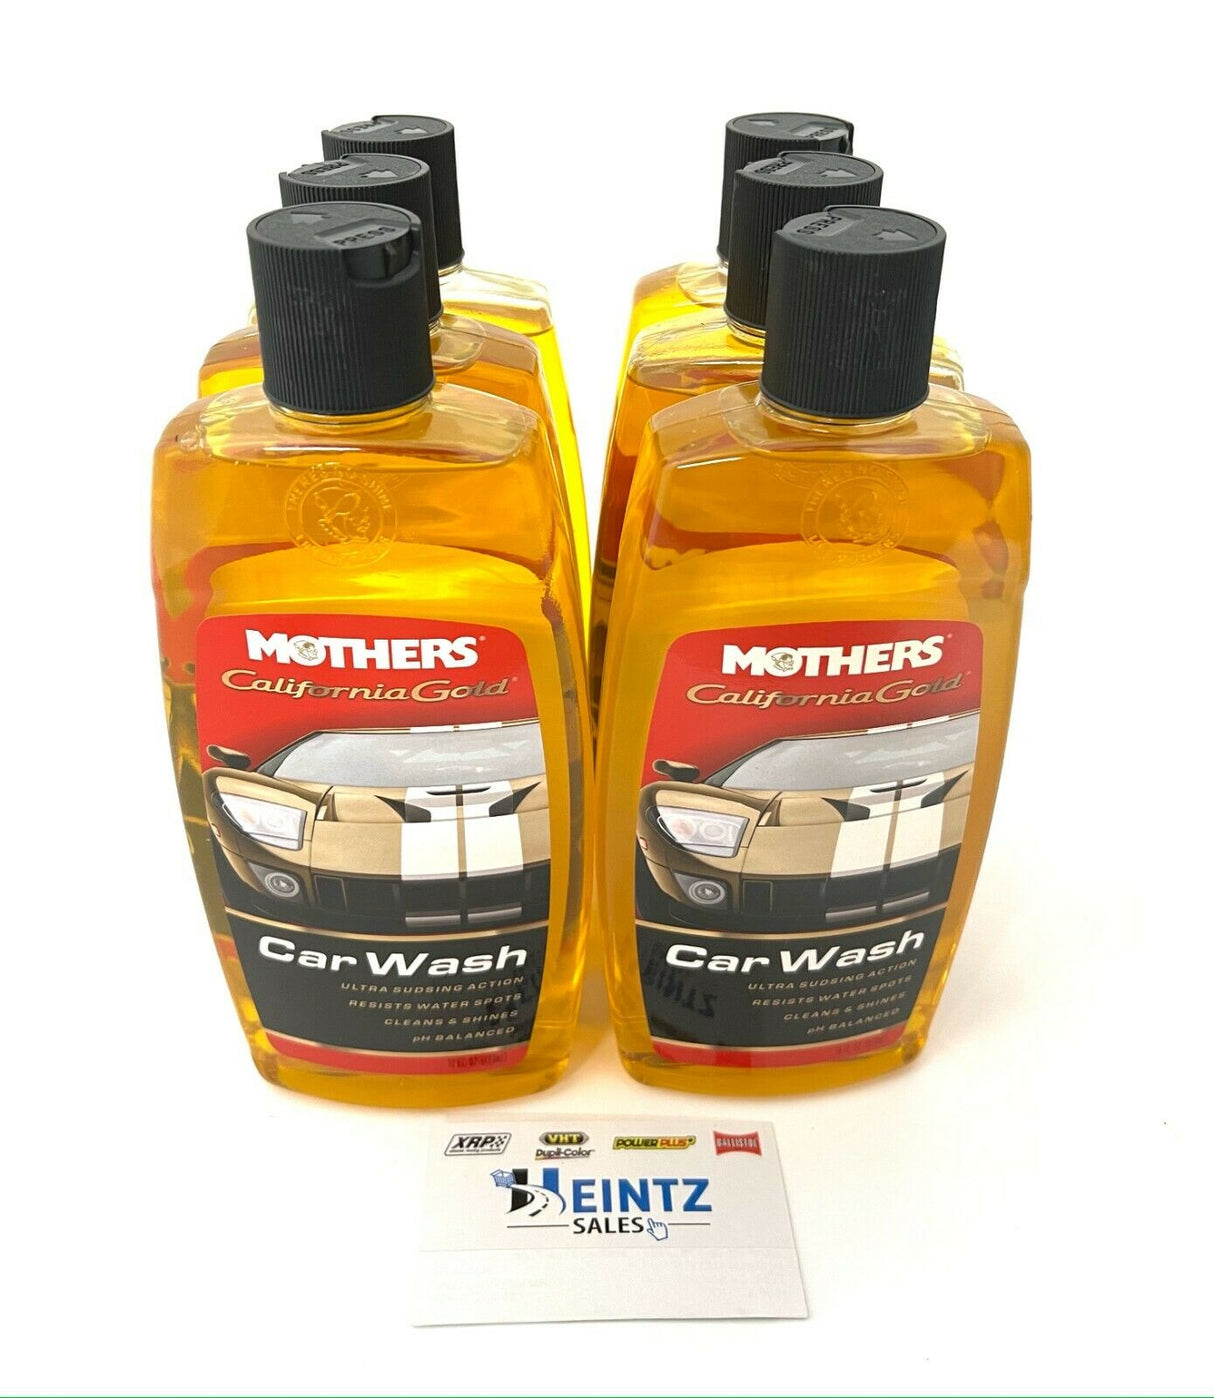 MOTHERS 05600 California Gold Car Wash 6 PACK - Resists water spots - 16 oz.